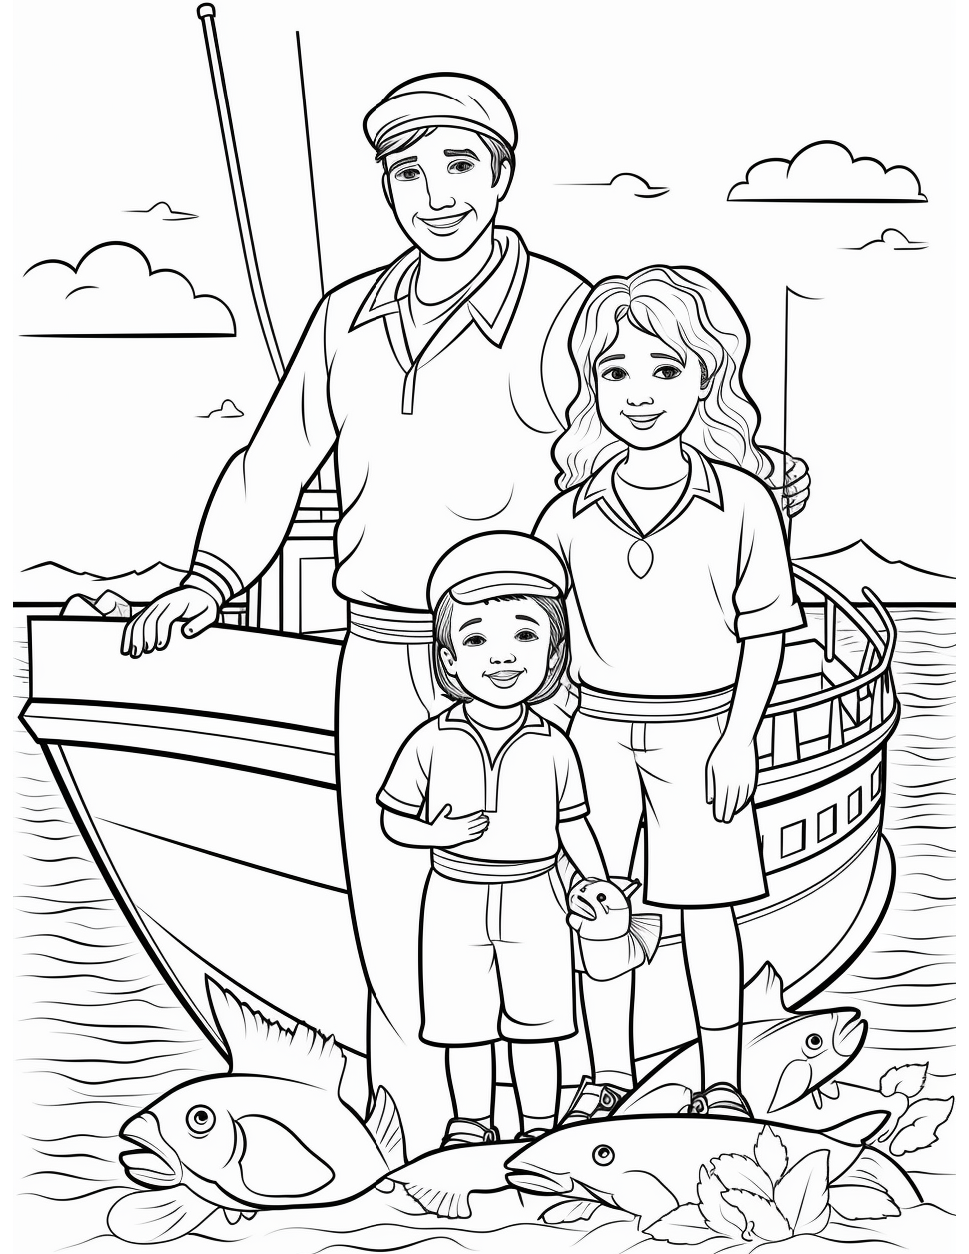 Fishing Coloring Page 1 - Line drawing of a family standing in front of a fishing boat